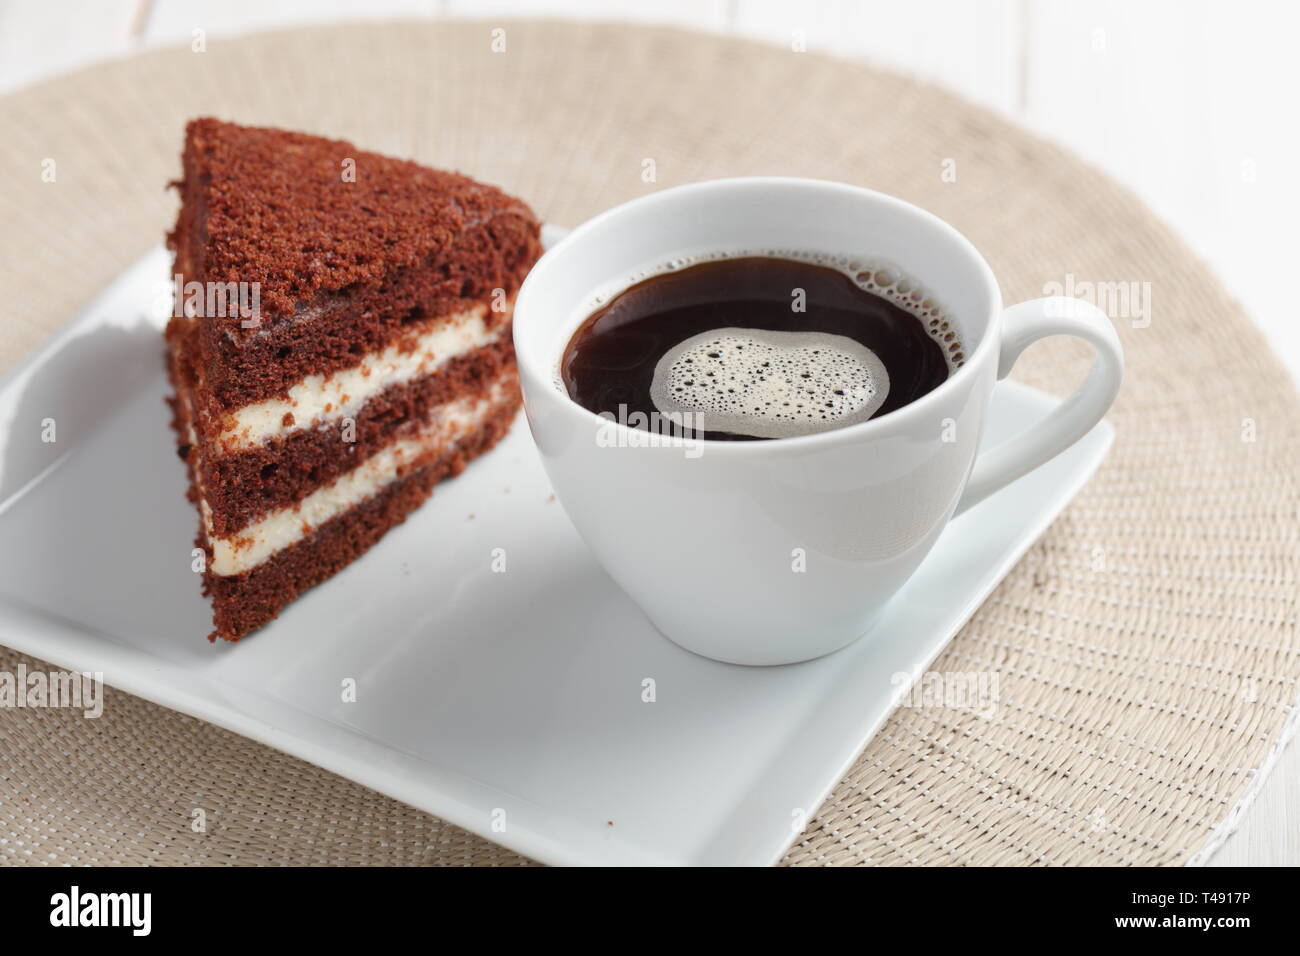 Chocolate sour cream cake and a cup of black coffee Stock Photo